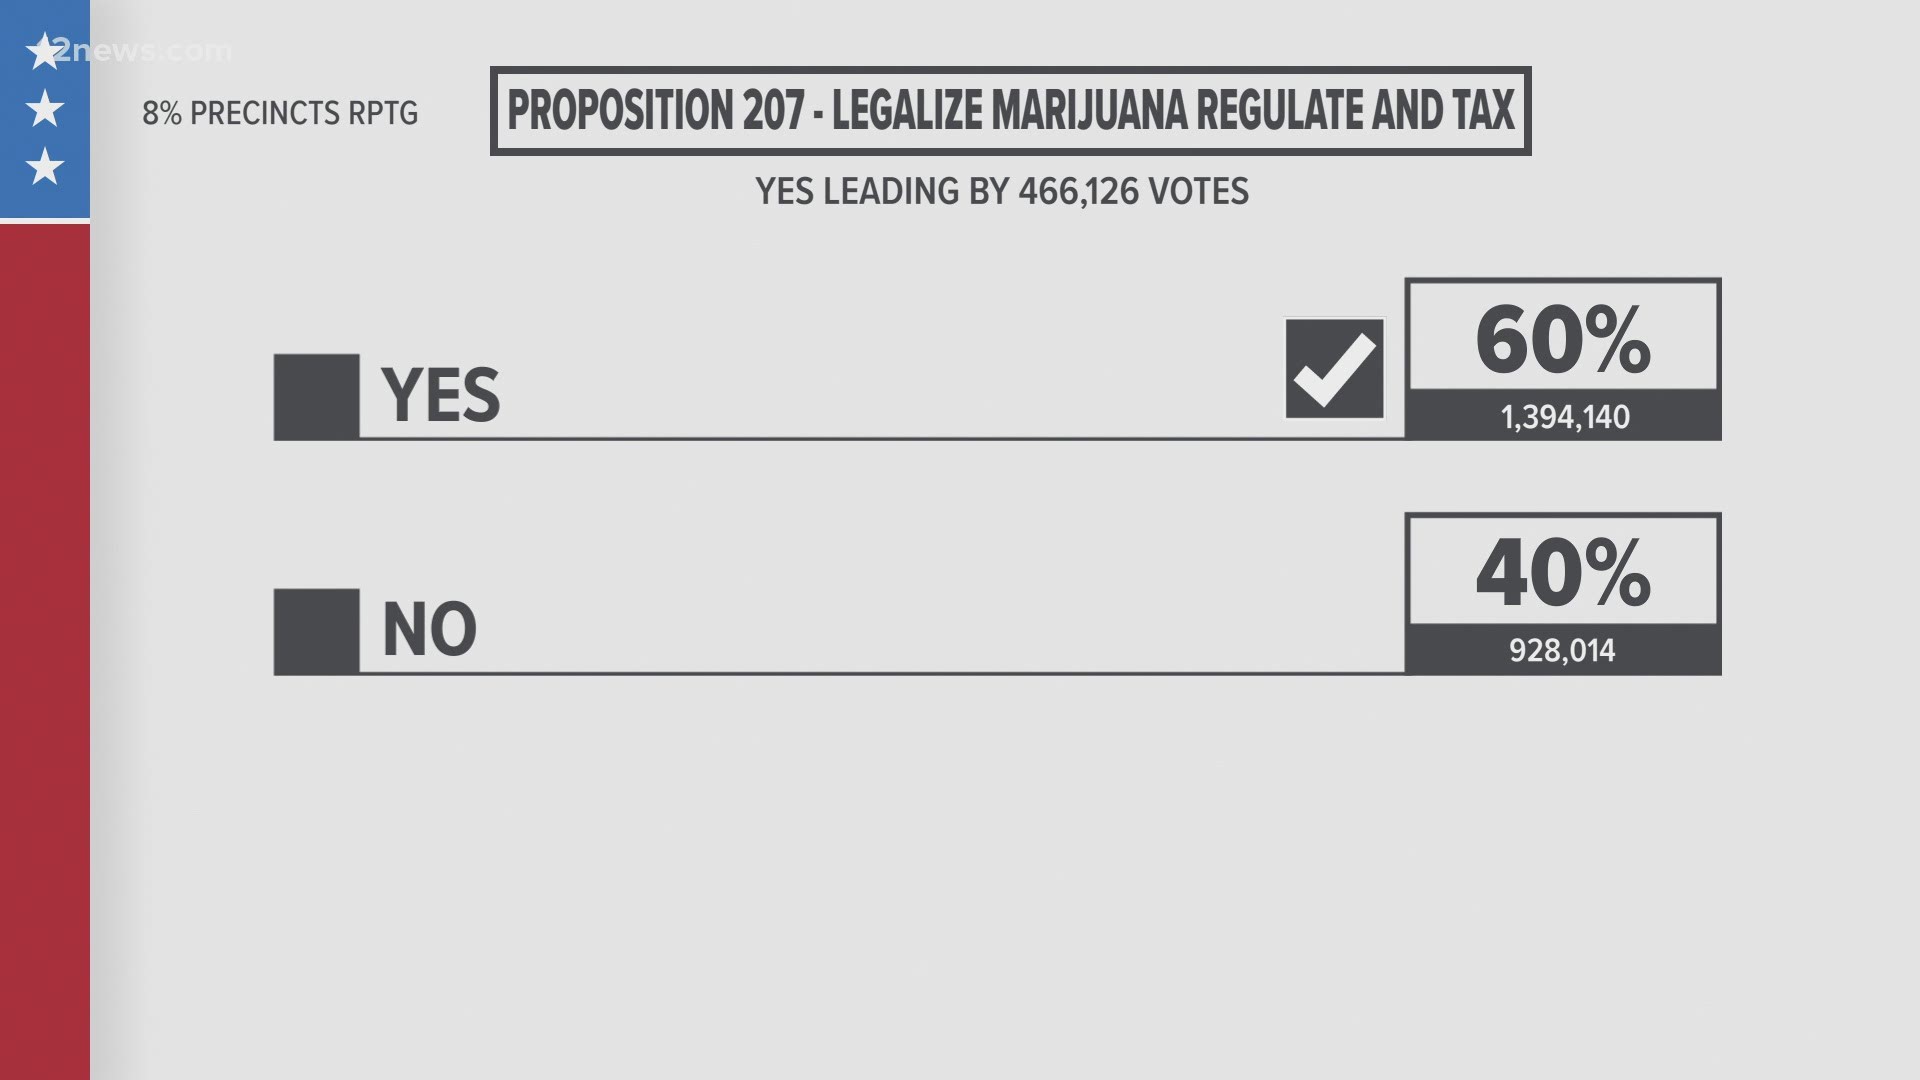 Recreational marijuana use has been legalized in Arizona. Proposition 207 allows for the legal possession and recreational use of marijuana for anyone over 21.